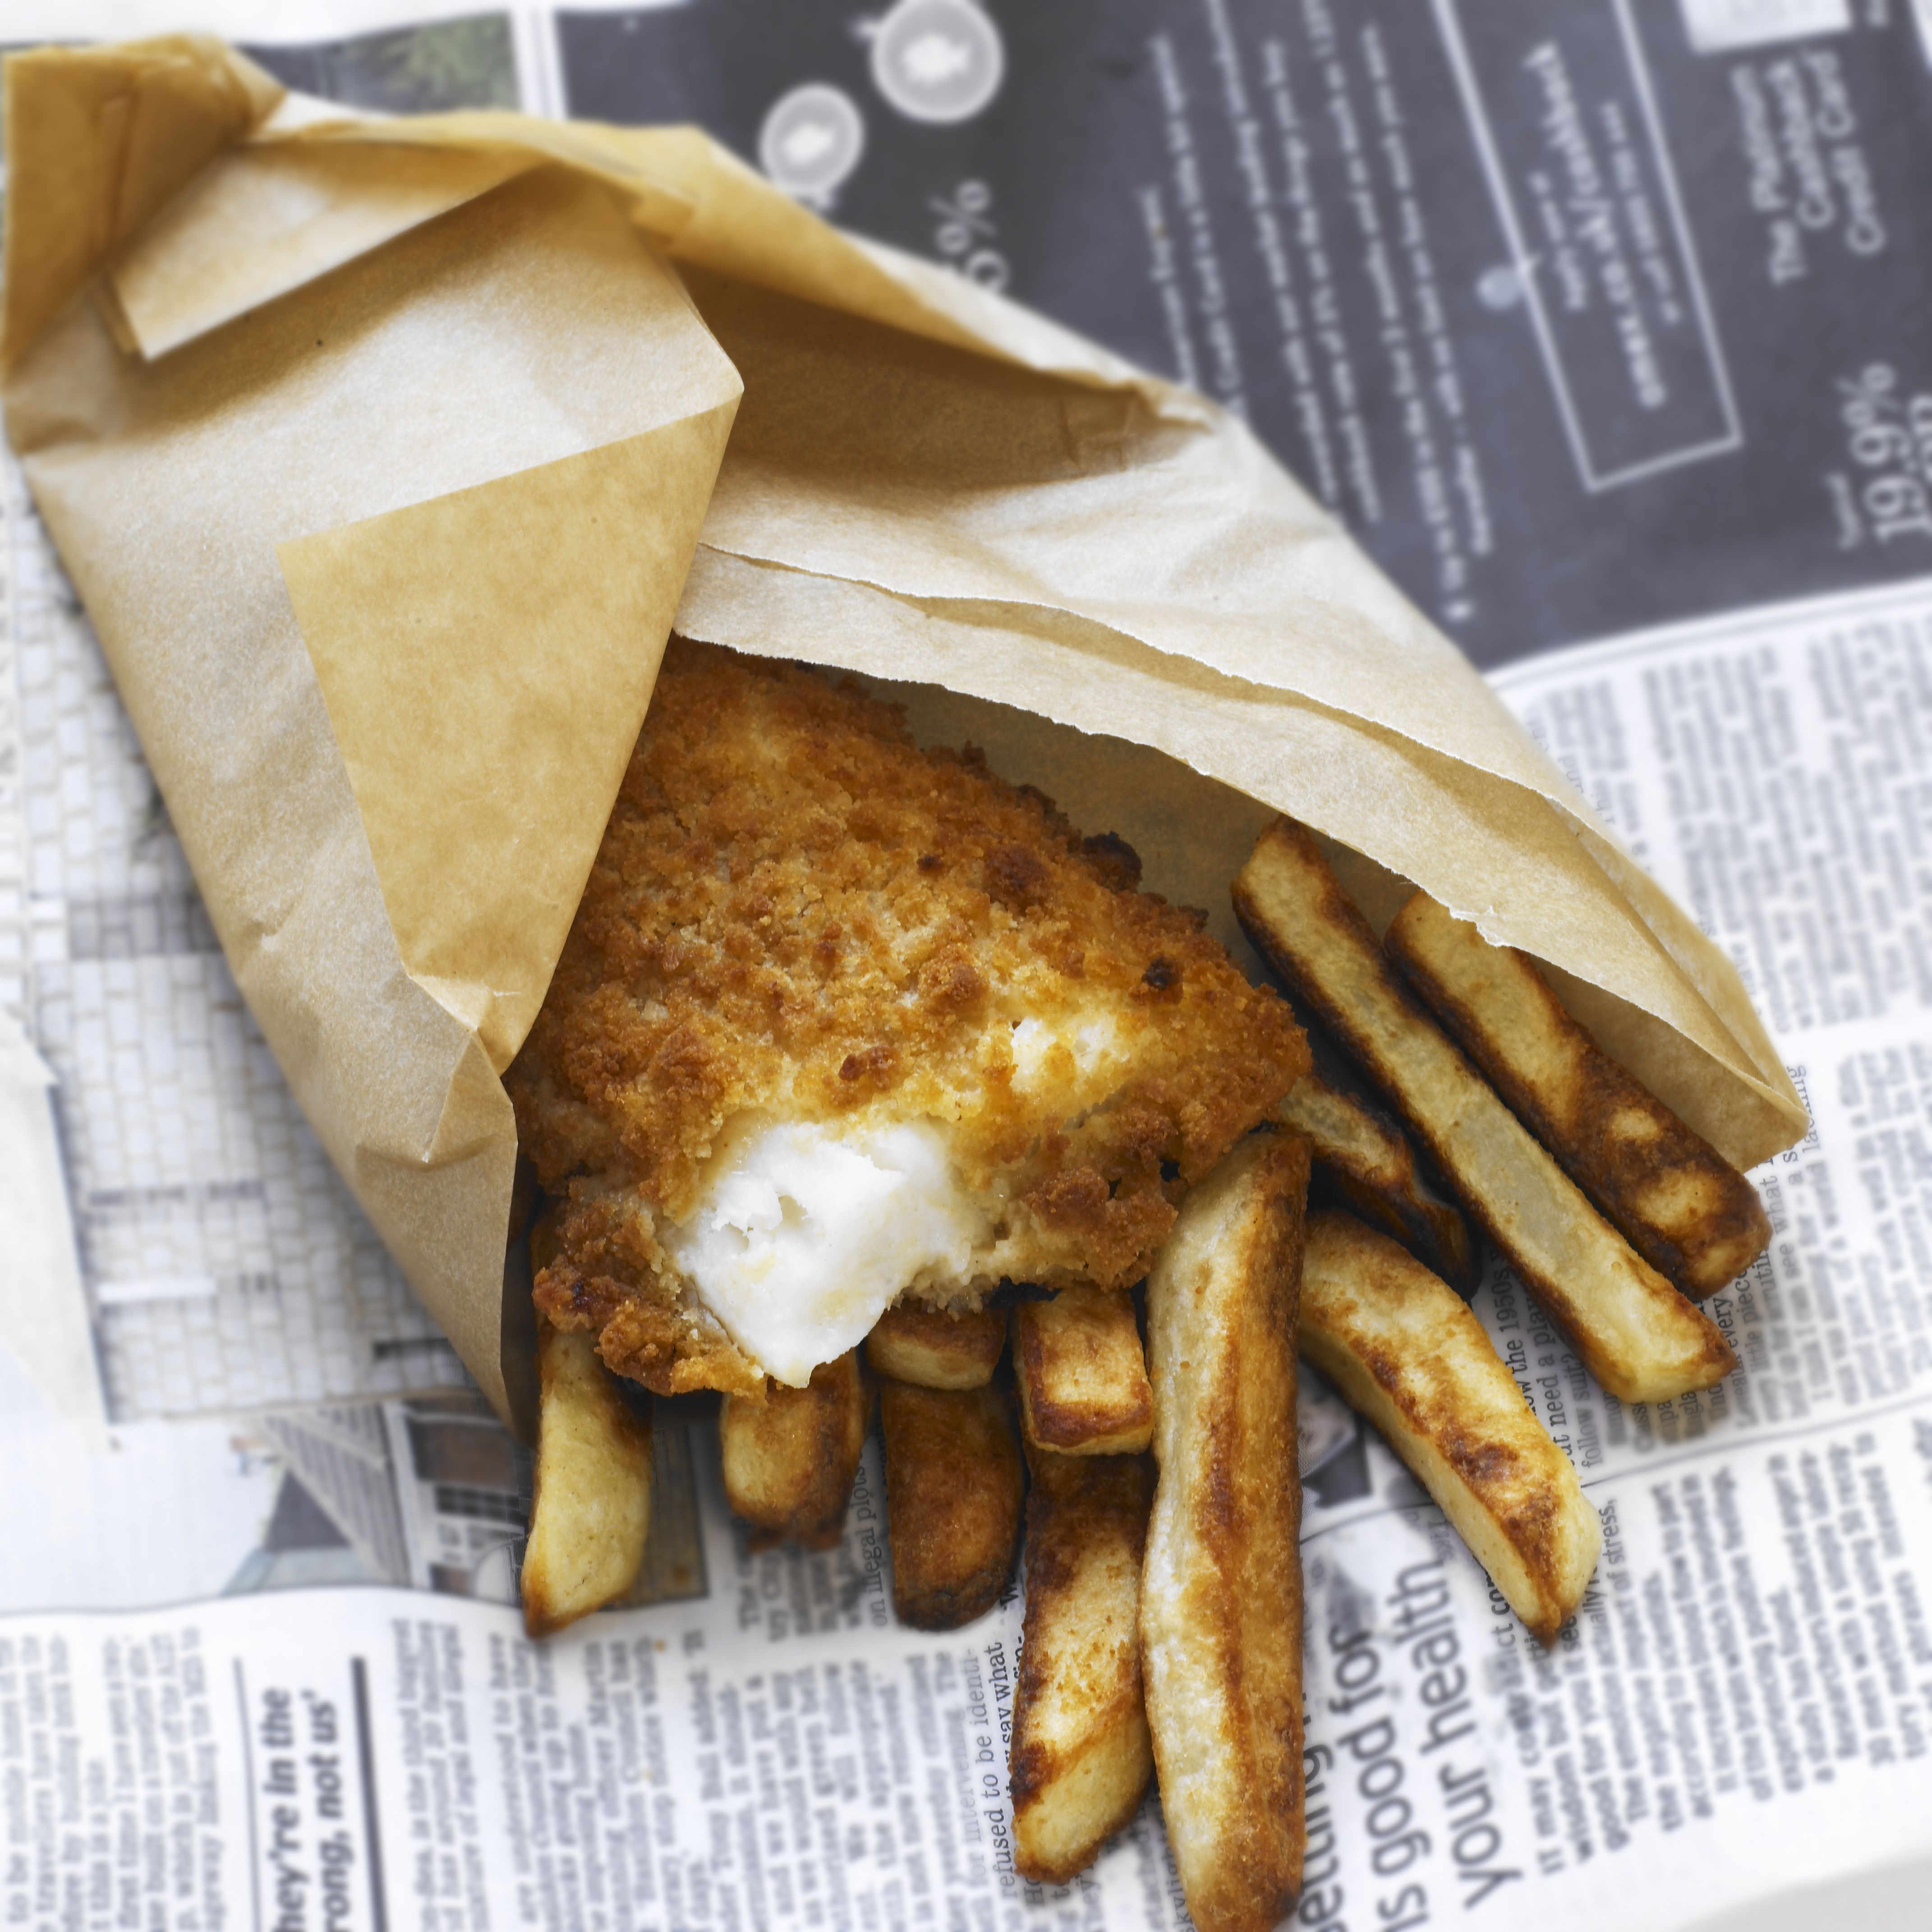 The discovery of increased numbers of squid in the North Sea could affect the British fish and chip industry. (Getty Images)